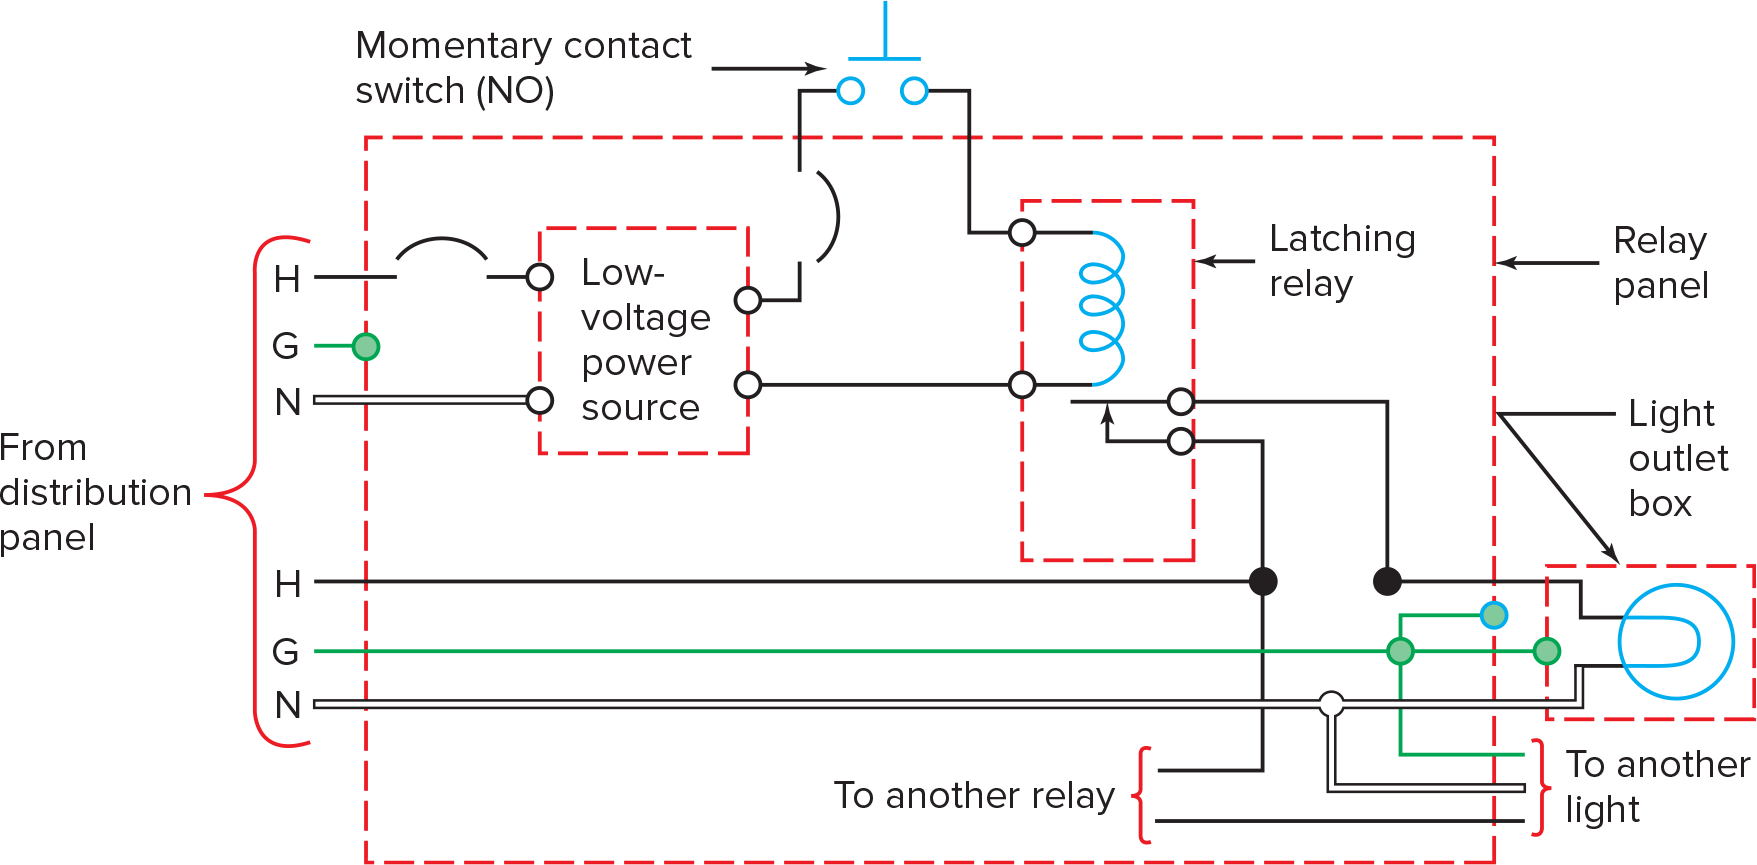 Basic low-voltage controlled lamp circuit.